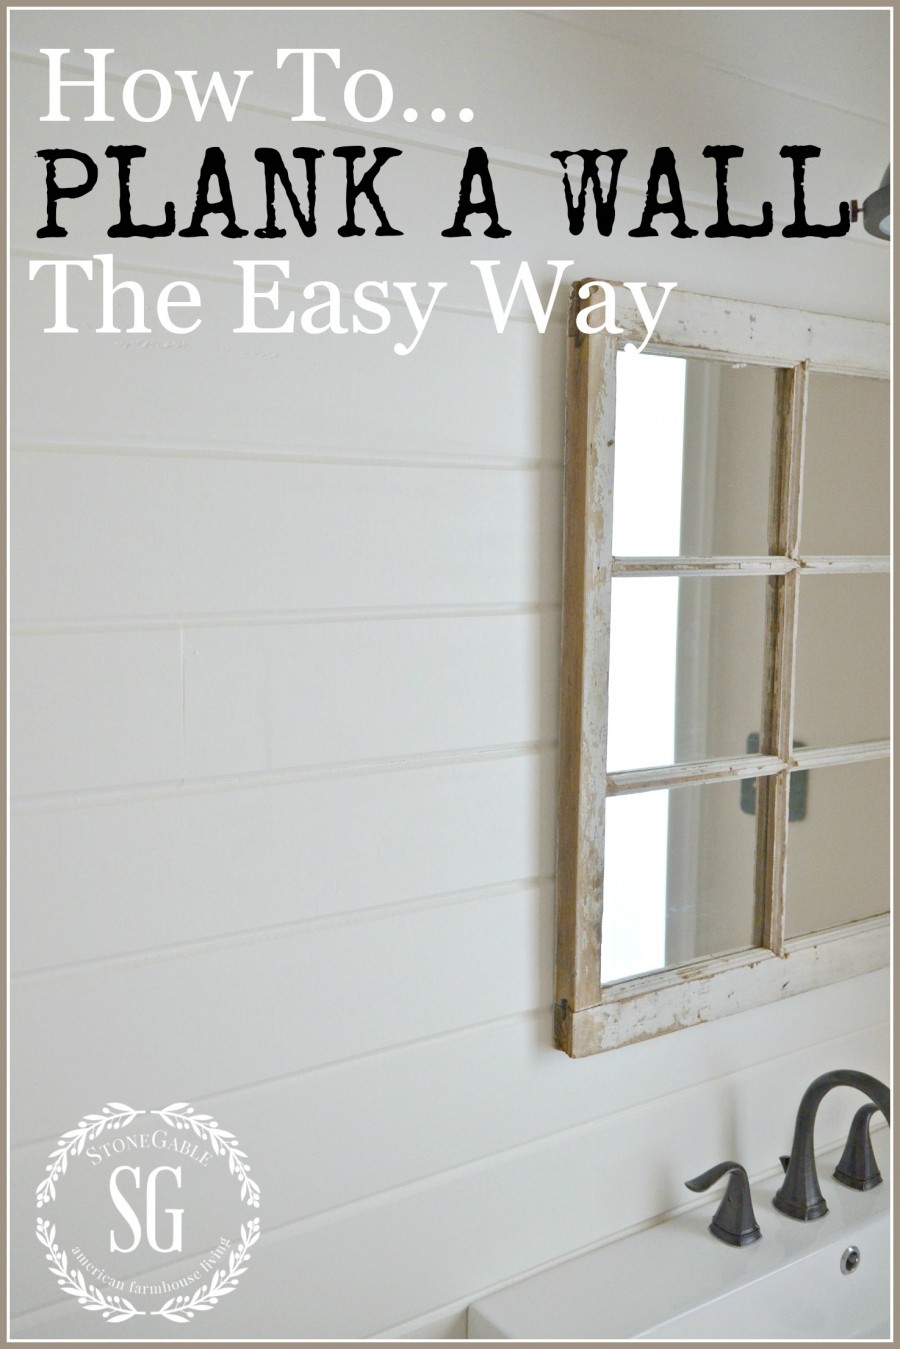 HOW TO PLANK A WALL THE EASY WAY-Cut, nail, paint-stonegableblog.com